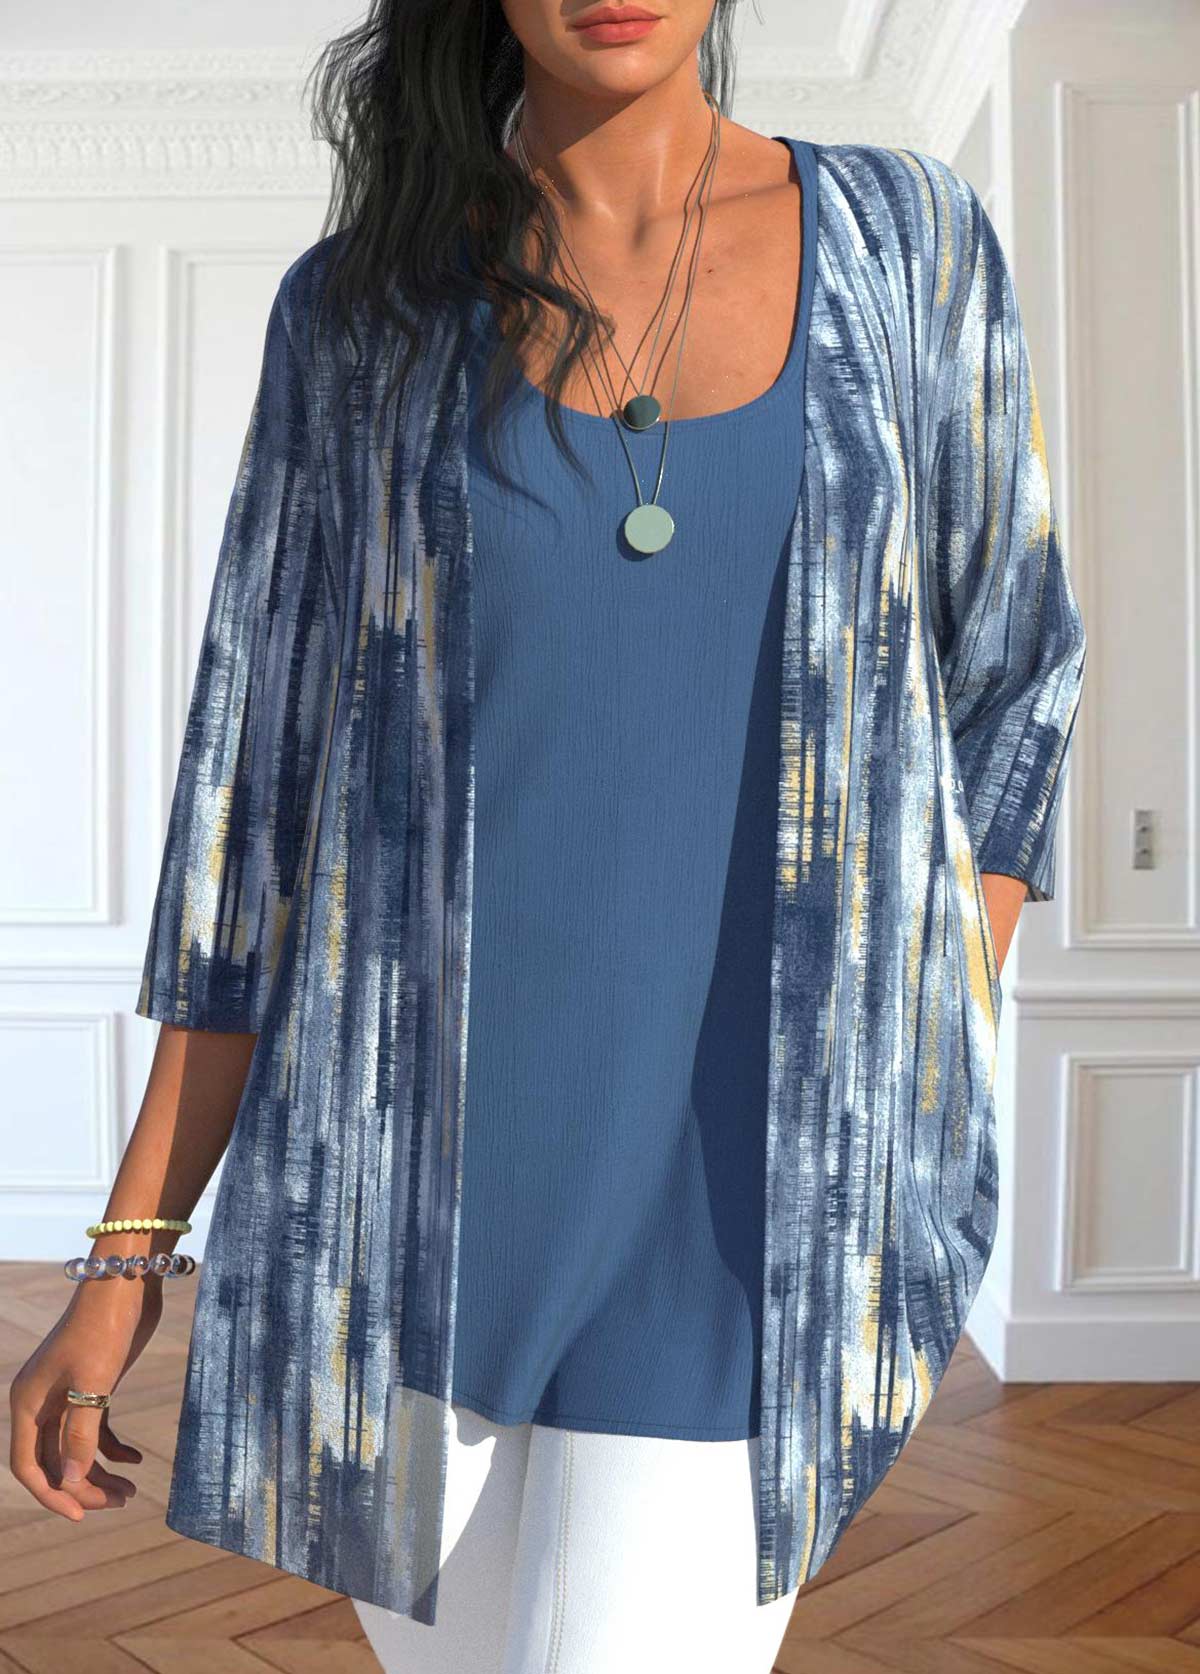 Scoop Neck Tank Top and Dusty Blue Cardigan